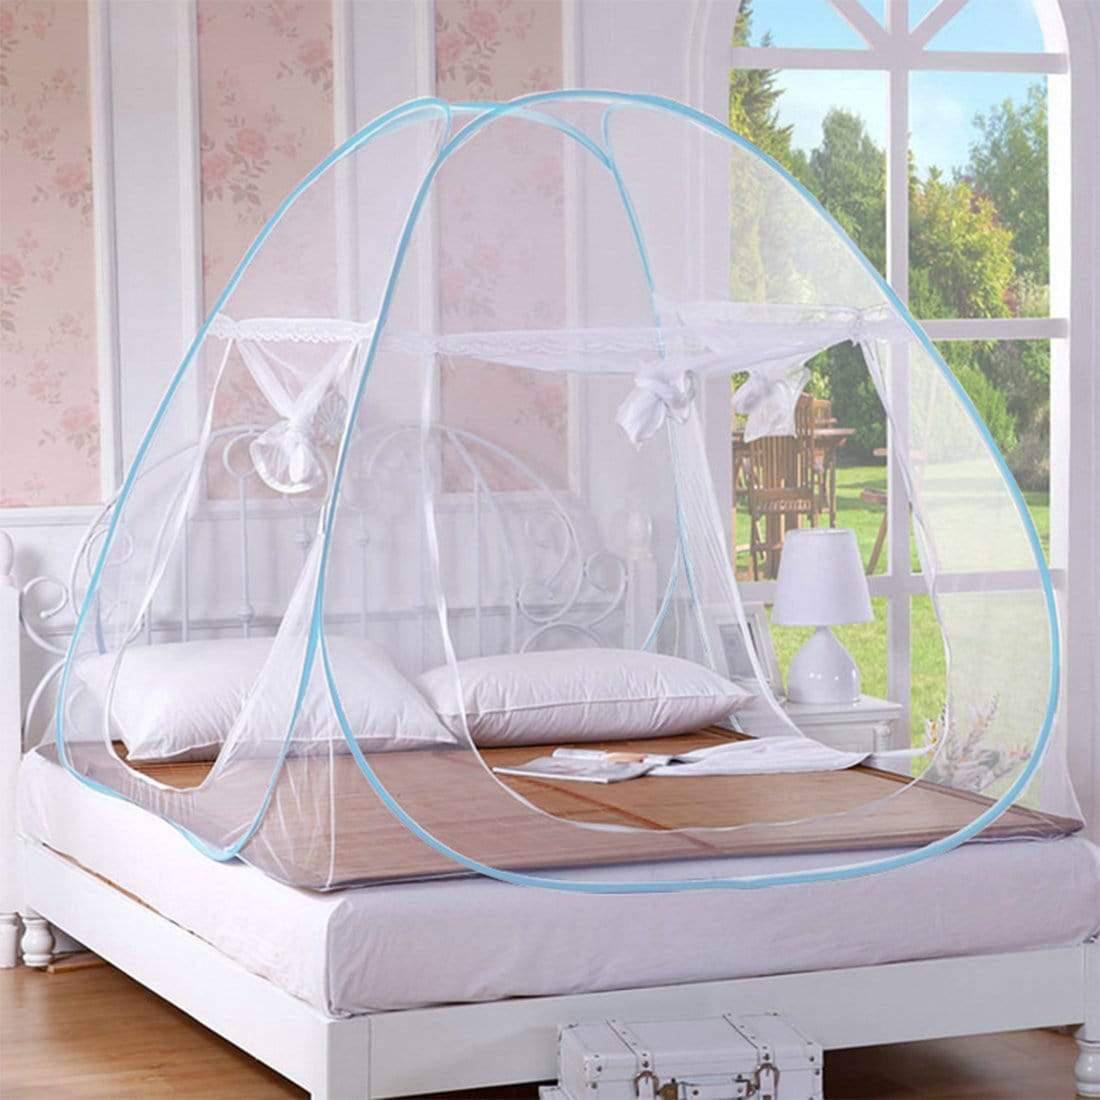 Mosquito Net For Double Bed and Our doors -Blue